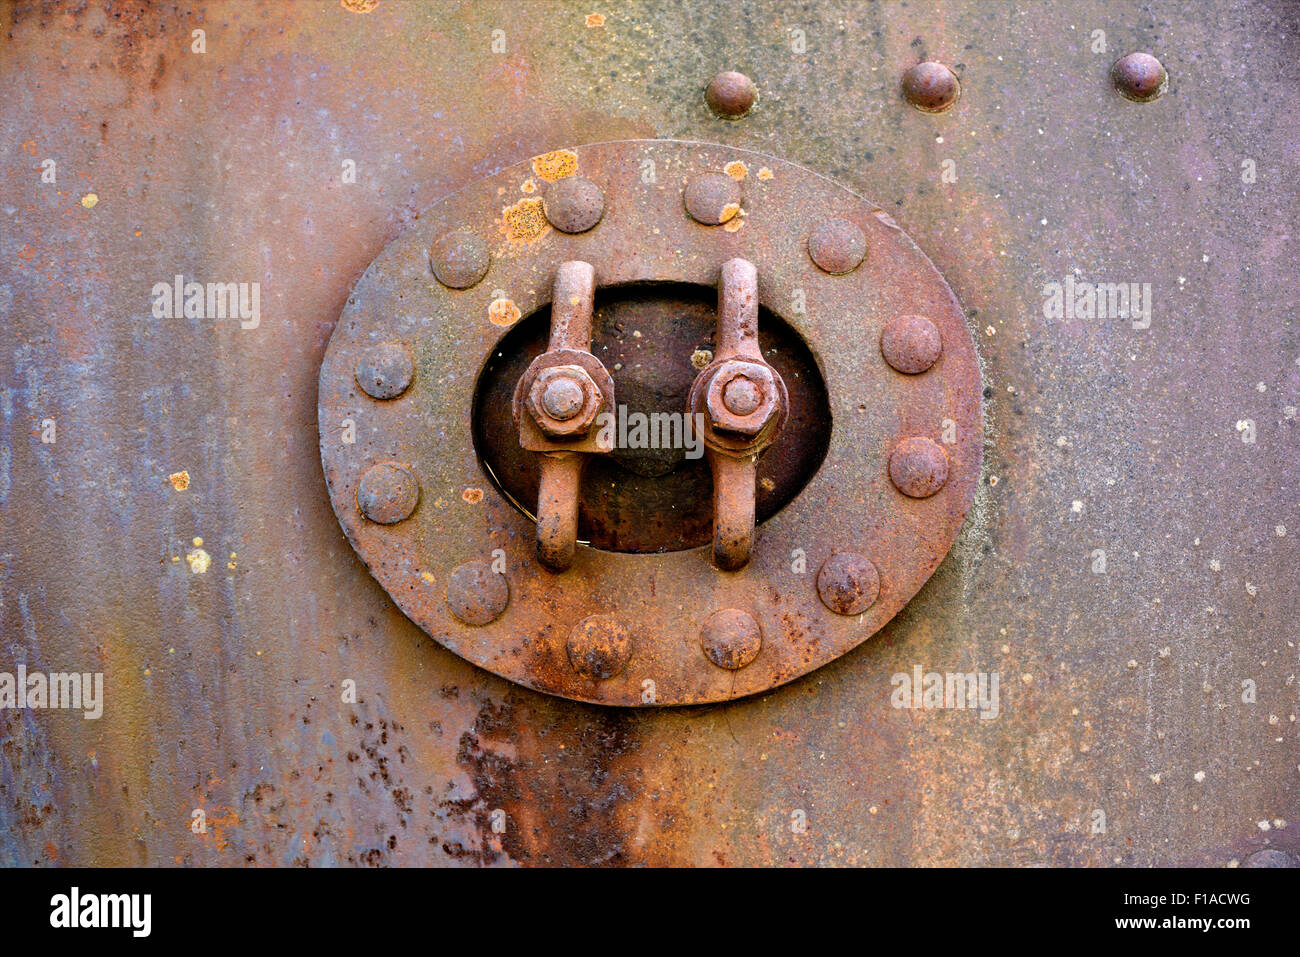 Backgrounds and textures: closed hatch on rusty metal surface with riveted joints, industrial abstract Stock Photo